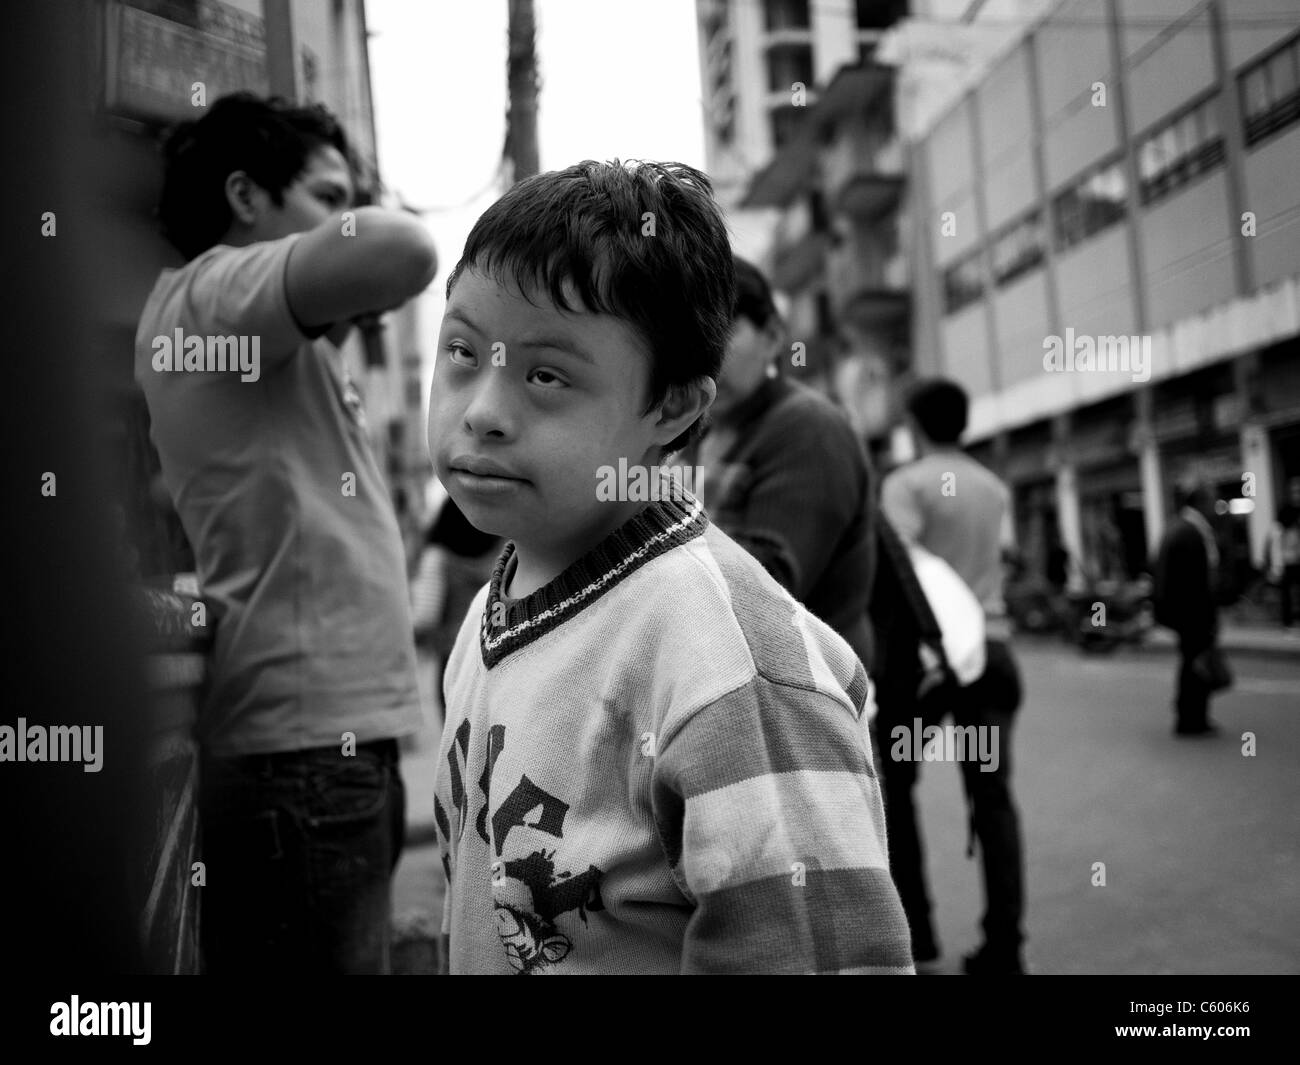 Street portrait of a young boy with down syndrome. Stock Photo